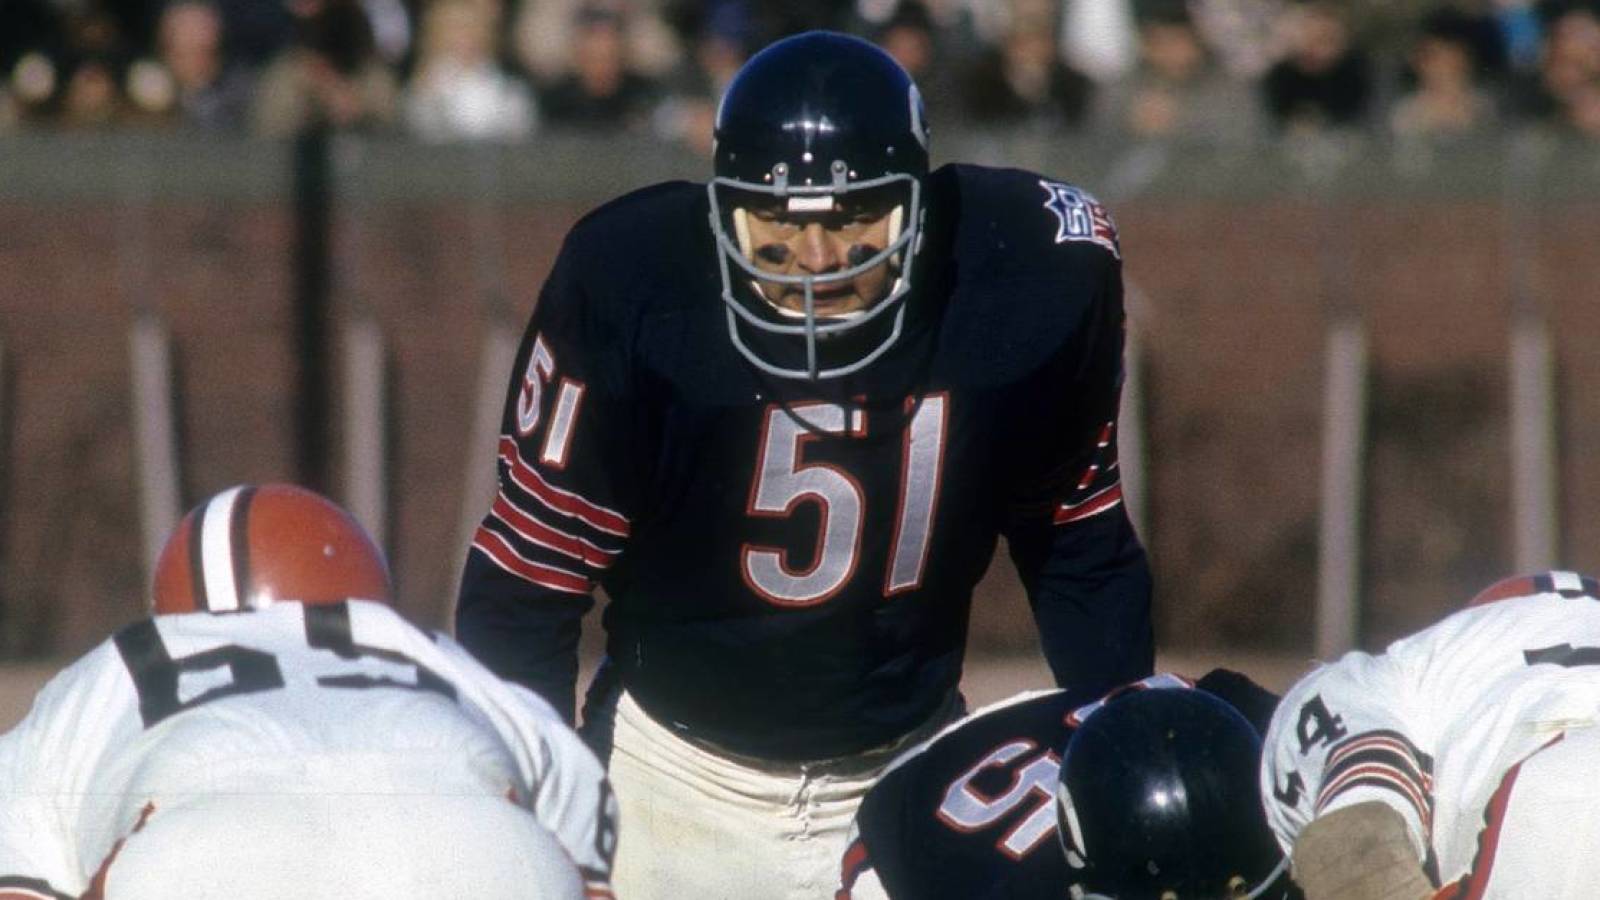 Dick butkus monster of the midway video